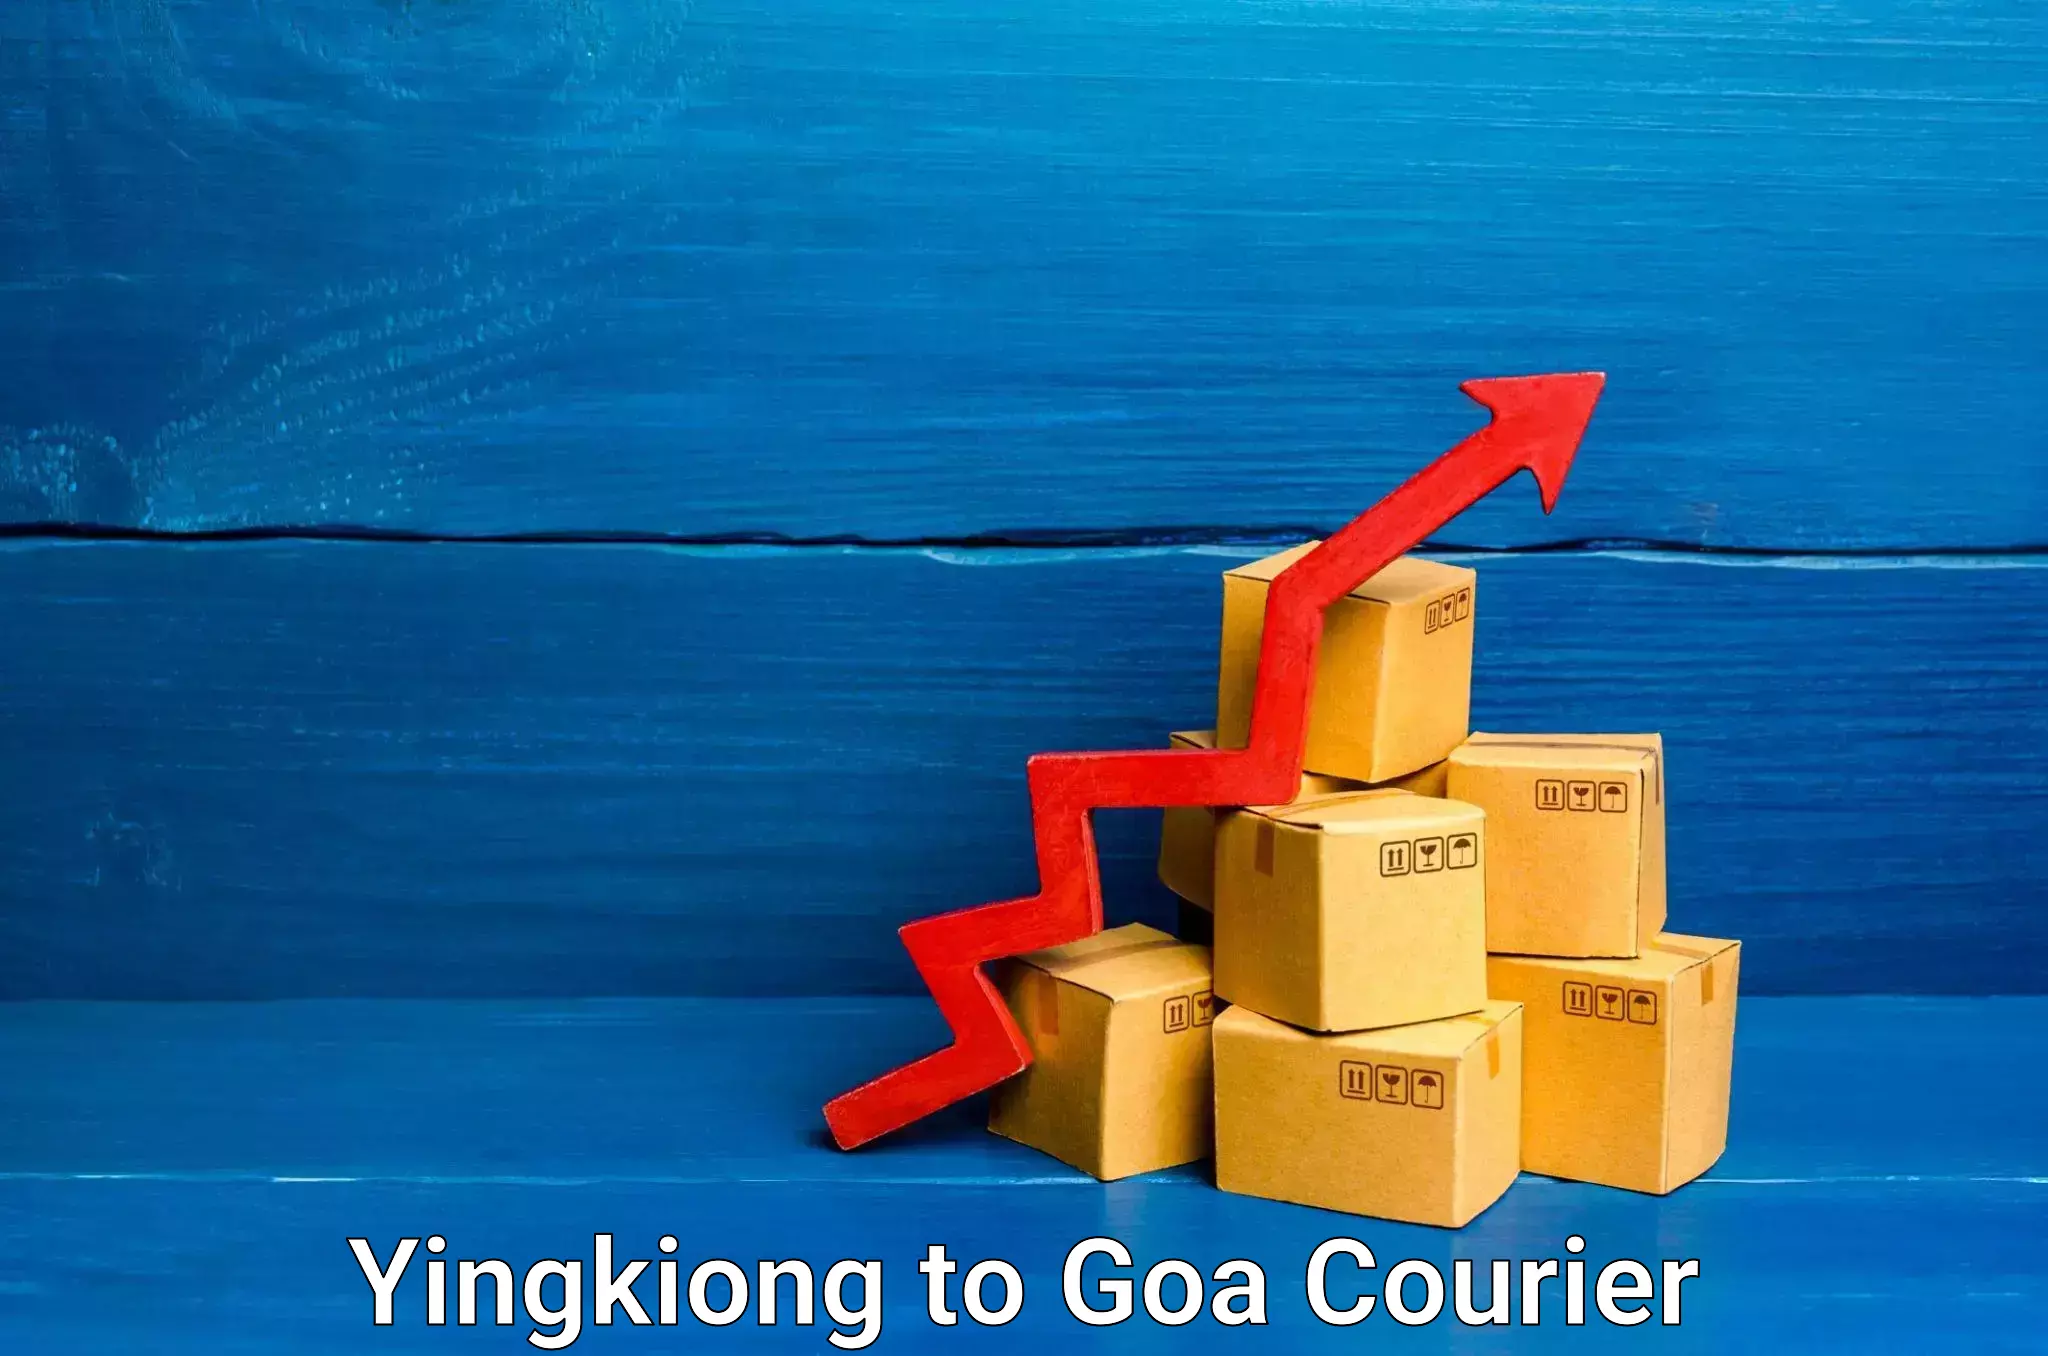 Reliable logistics providers Yingkiong to Goa